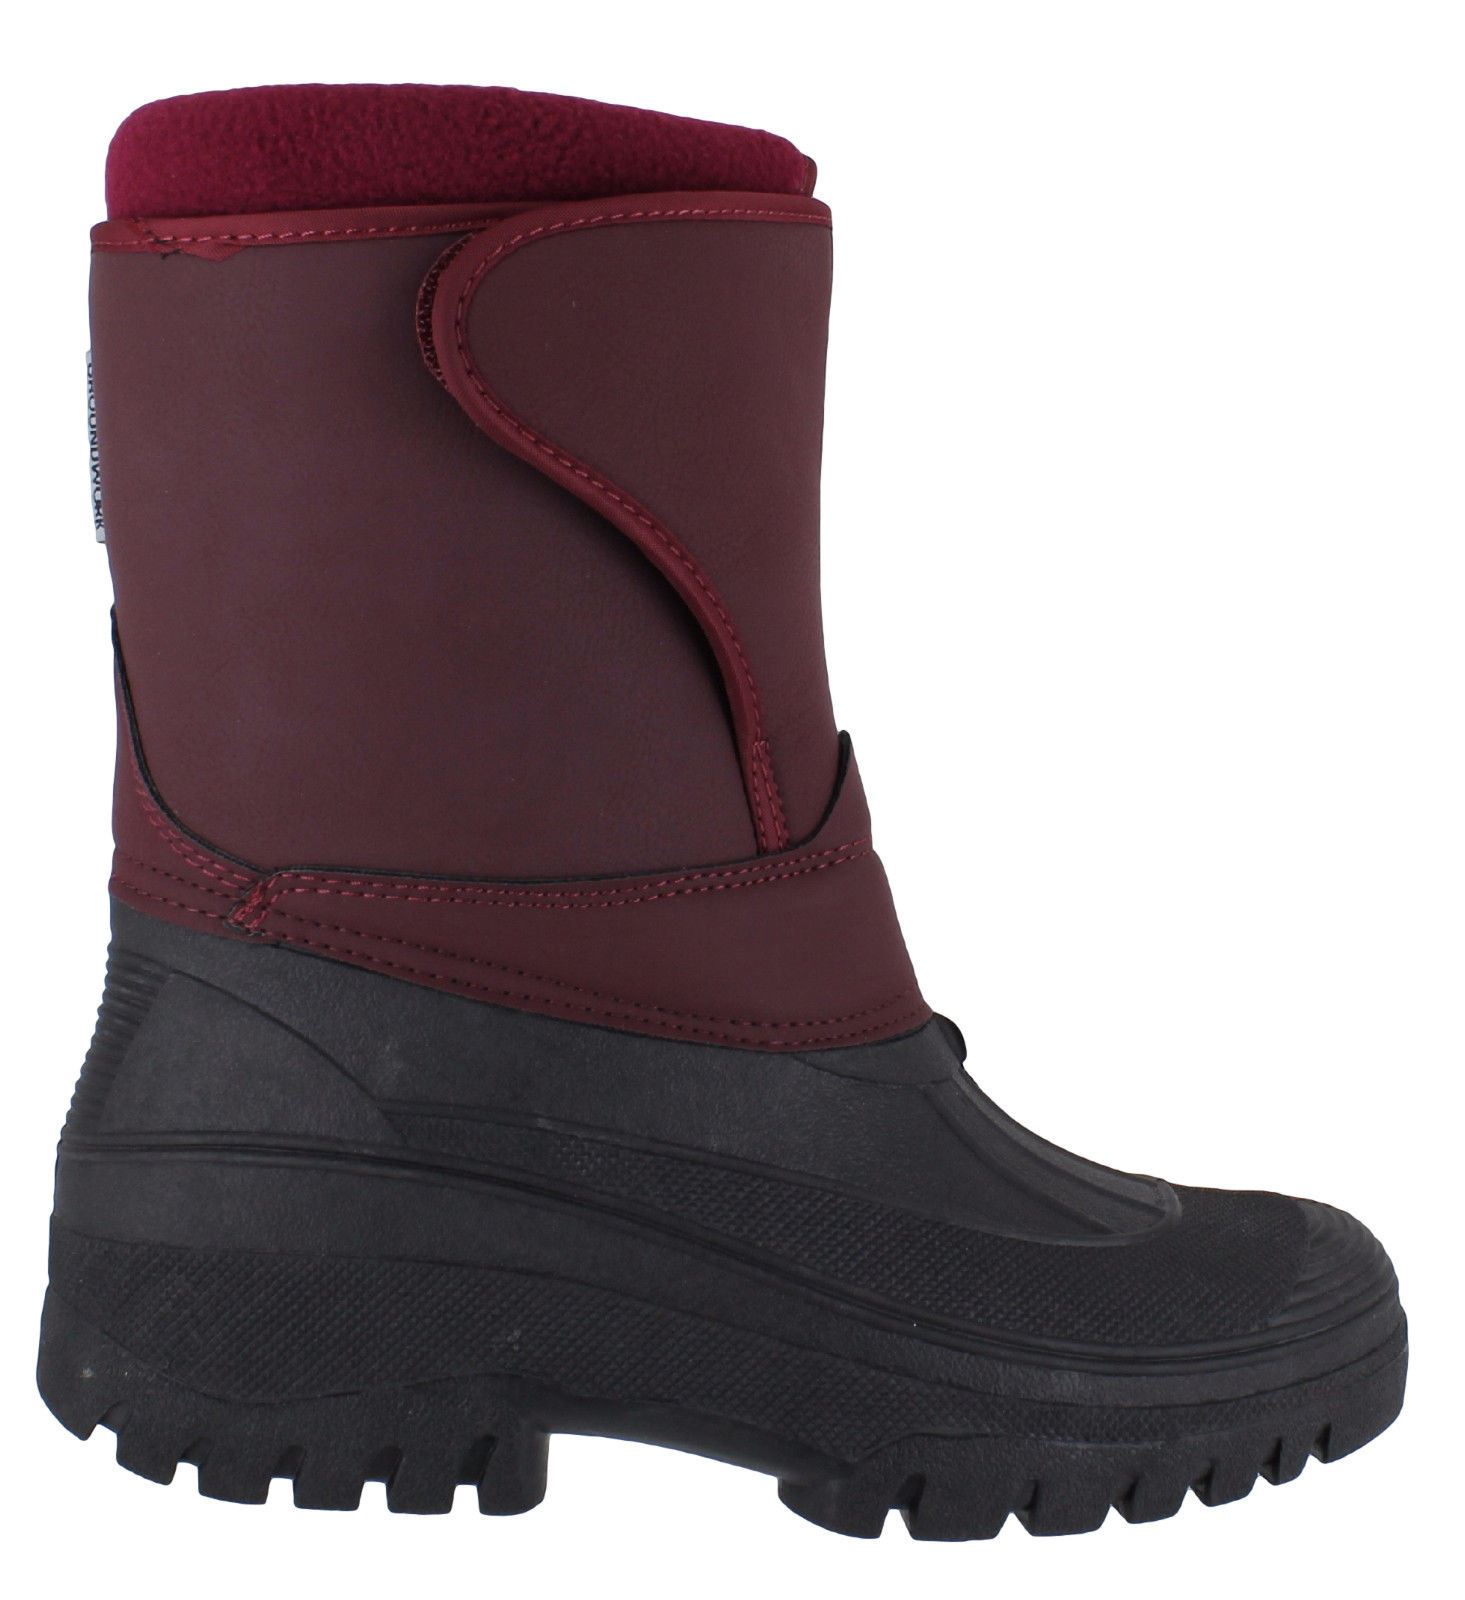 Womens Nubuck Style Easy Velcro Winter Stable Yard Snow Boots Sizes 4 to 8